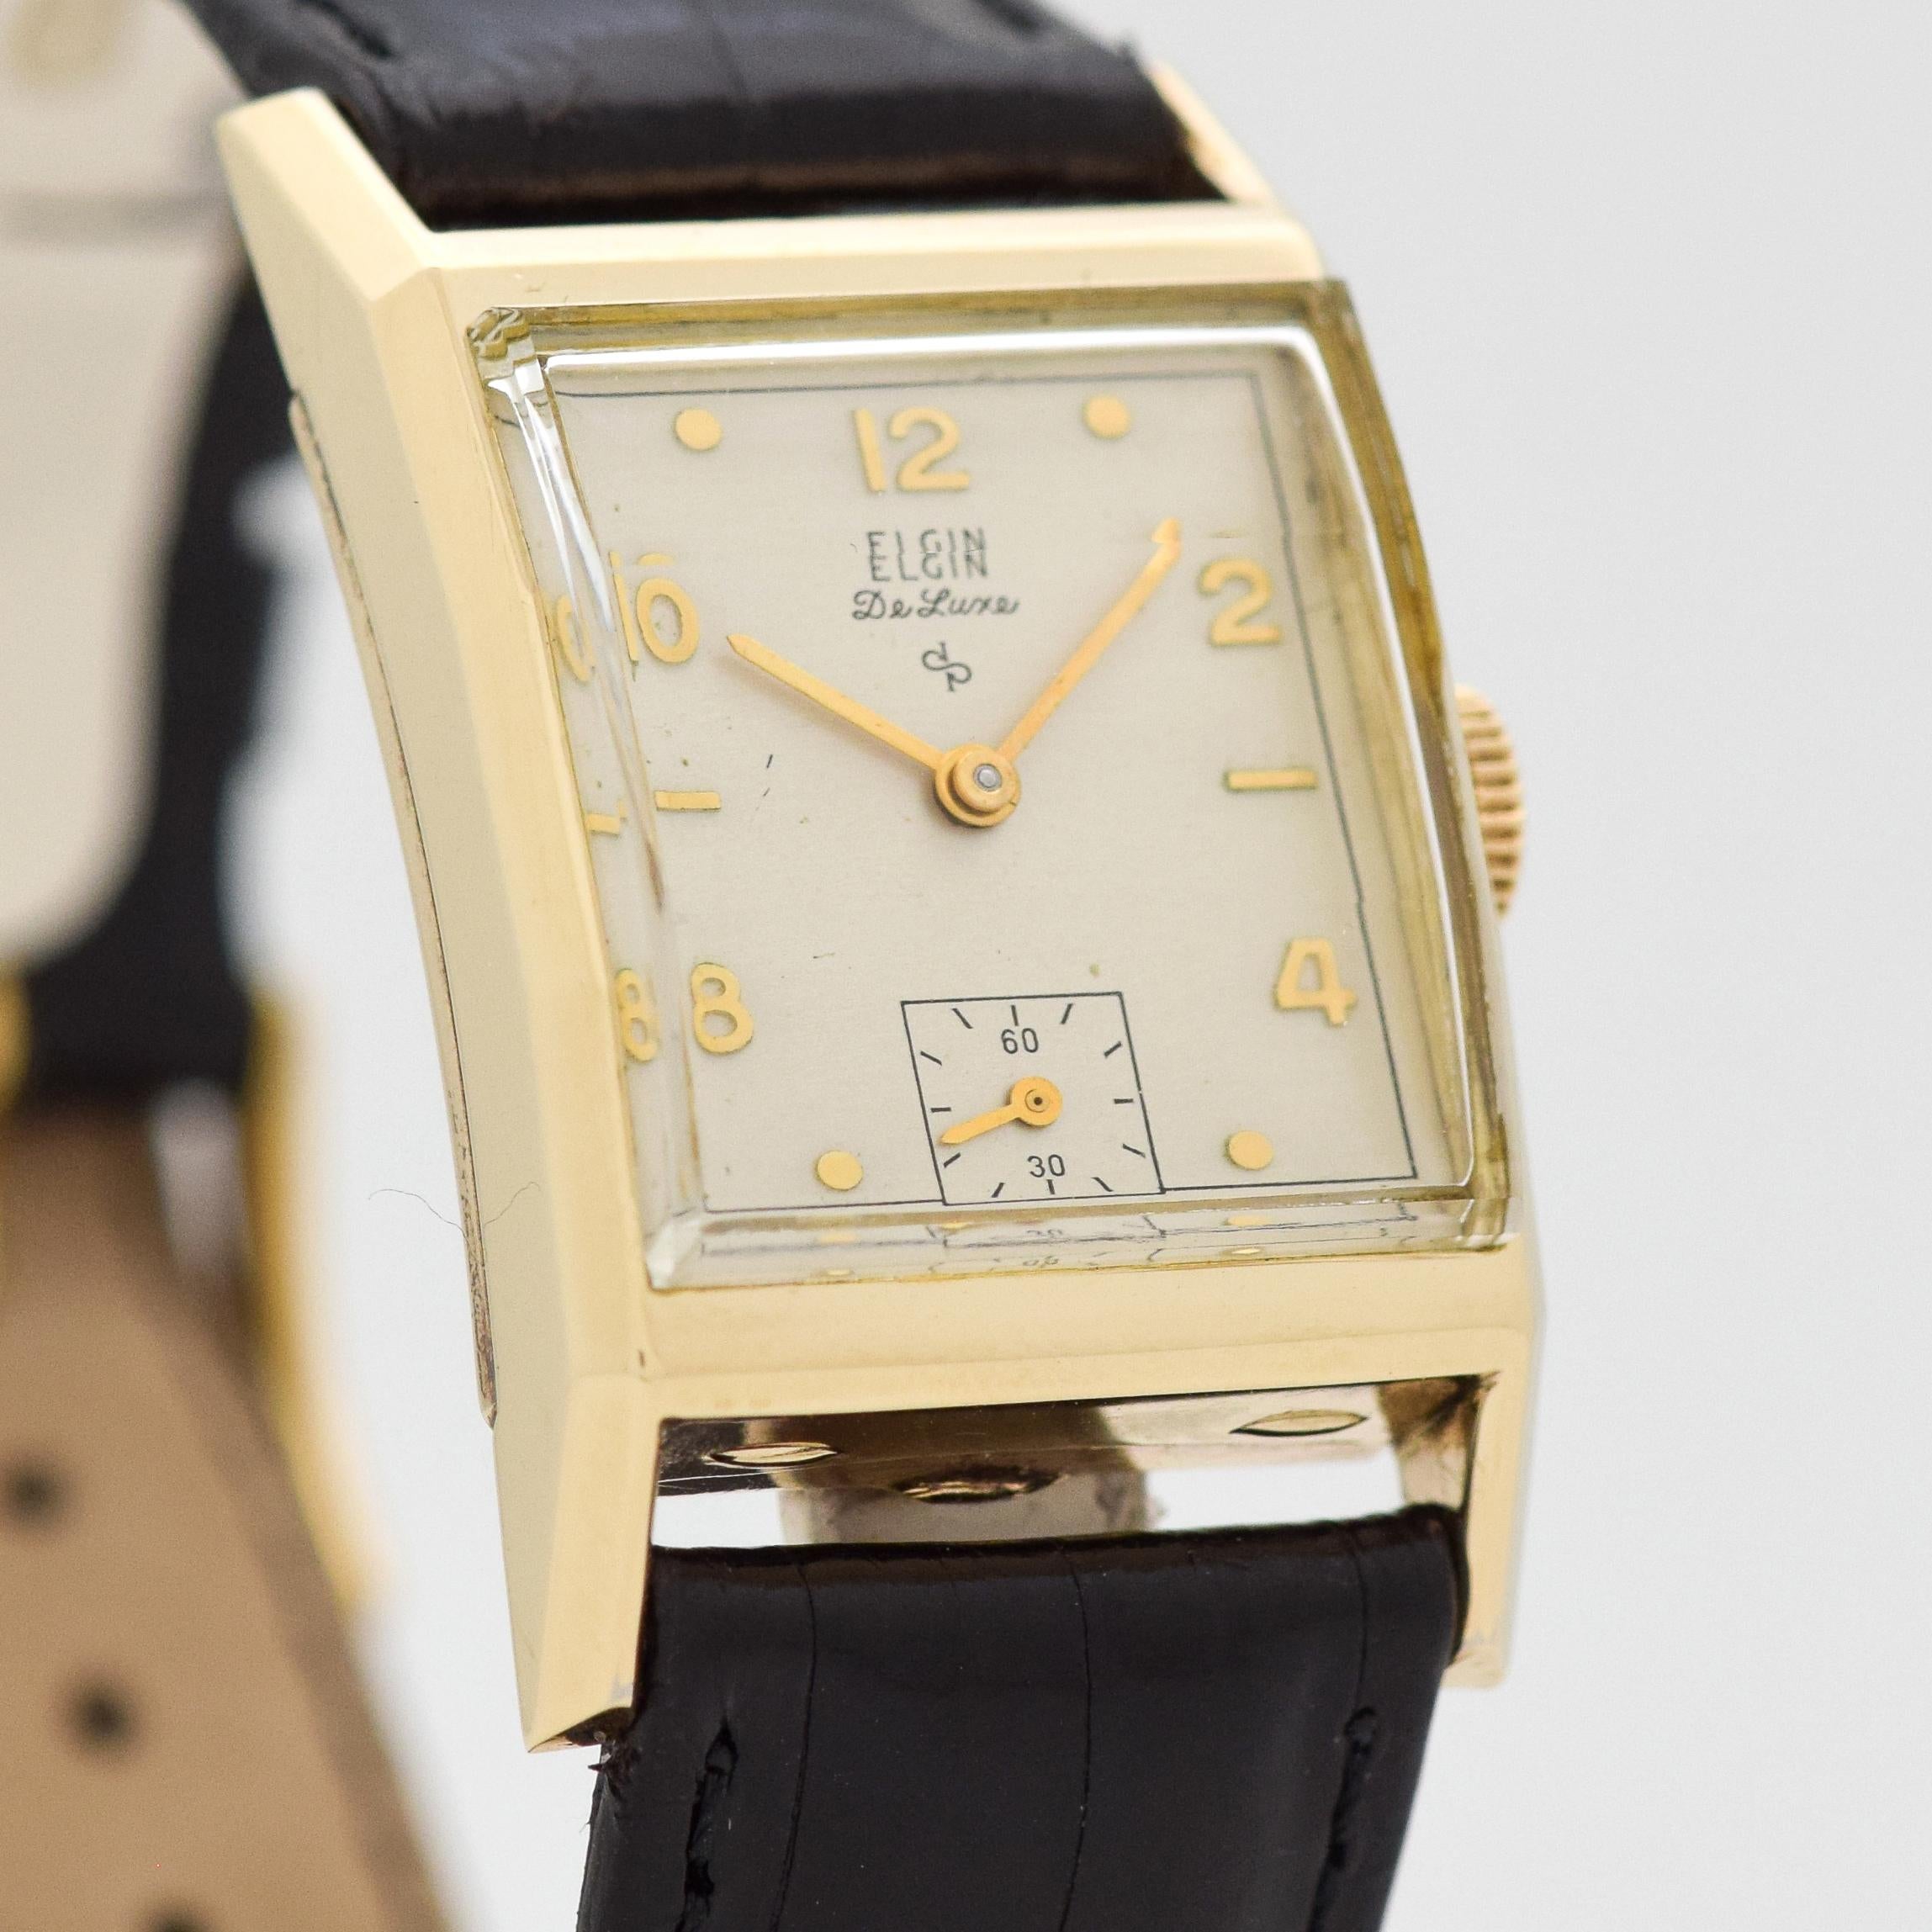 1948 Vintage De Luxe Square 10k Yellow Gold Filled watch with Beveled Crystal with Original Silver Dial with Applied Gold Color Arabic 2, 4, 8, 10, and 12 with Round Markers. 22mm x 36mm lug to lug (0.87 in. x 1.42 in.) - 17 jewel, manual caliber